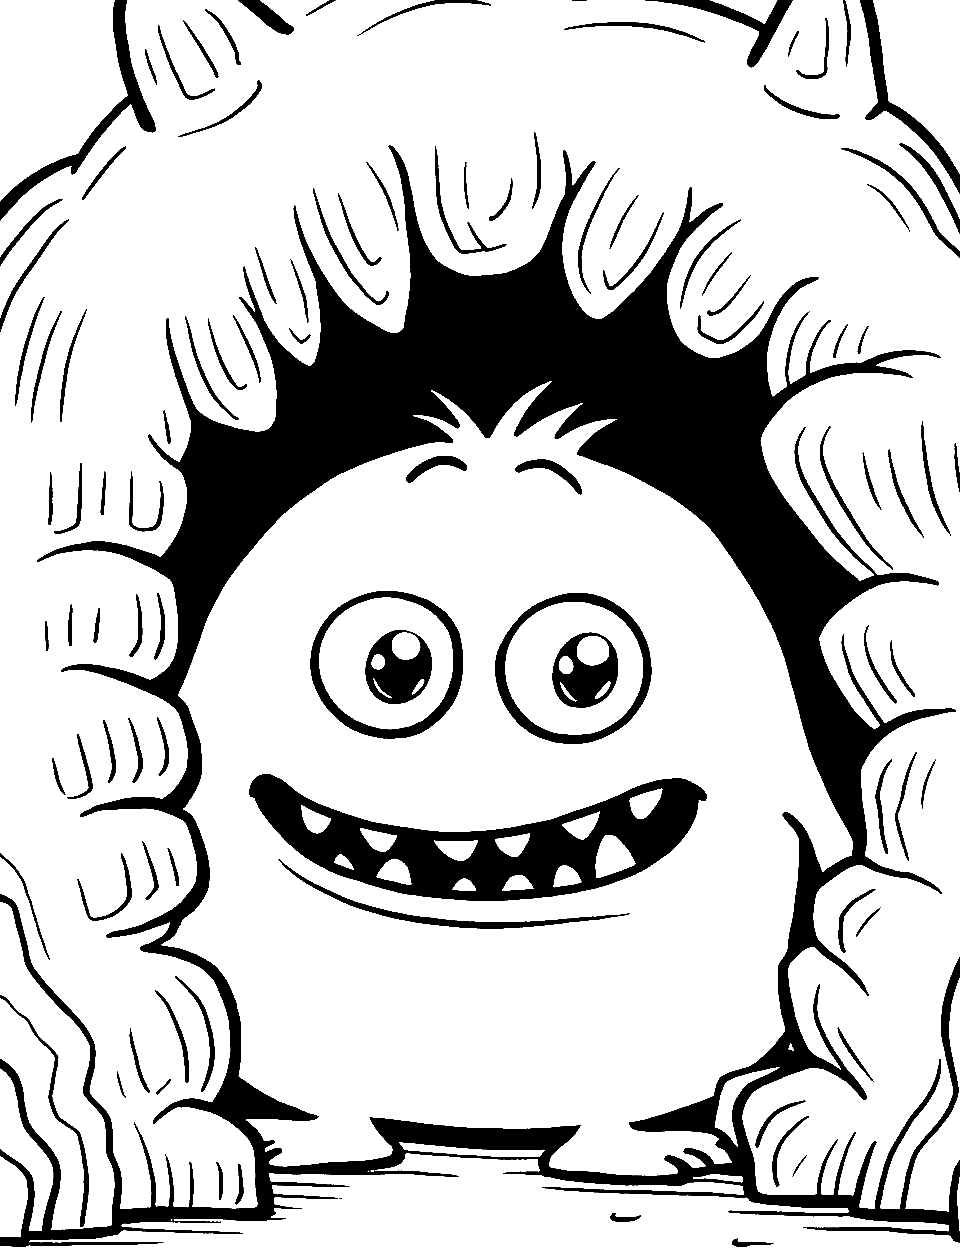 Monster in a Cave Coloring Page - A small monster peering out from its cave.